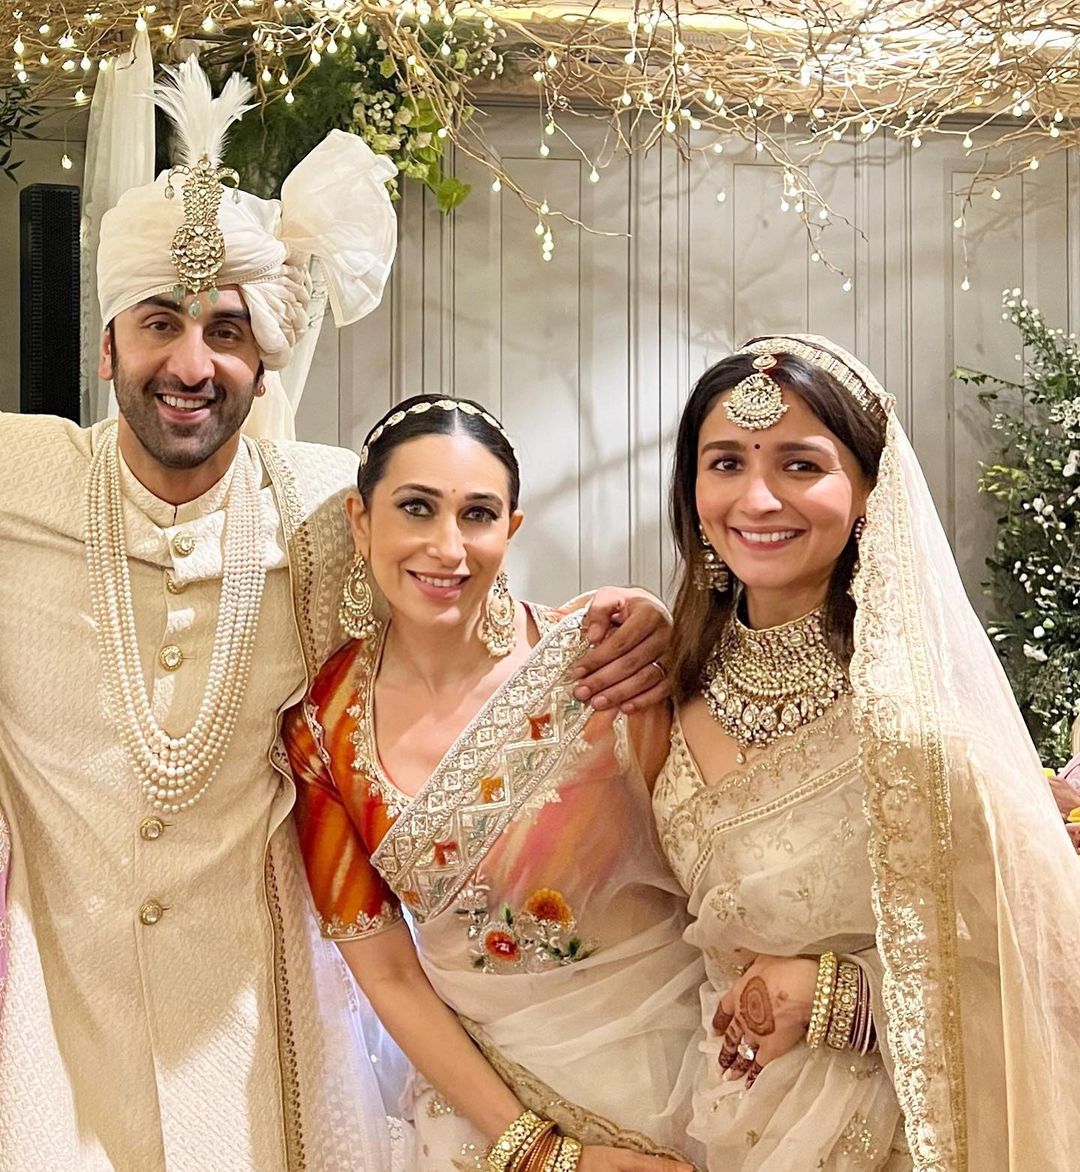 Ranbir-Alia's wedding: Alia shares pictures from the special day